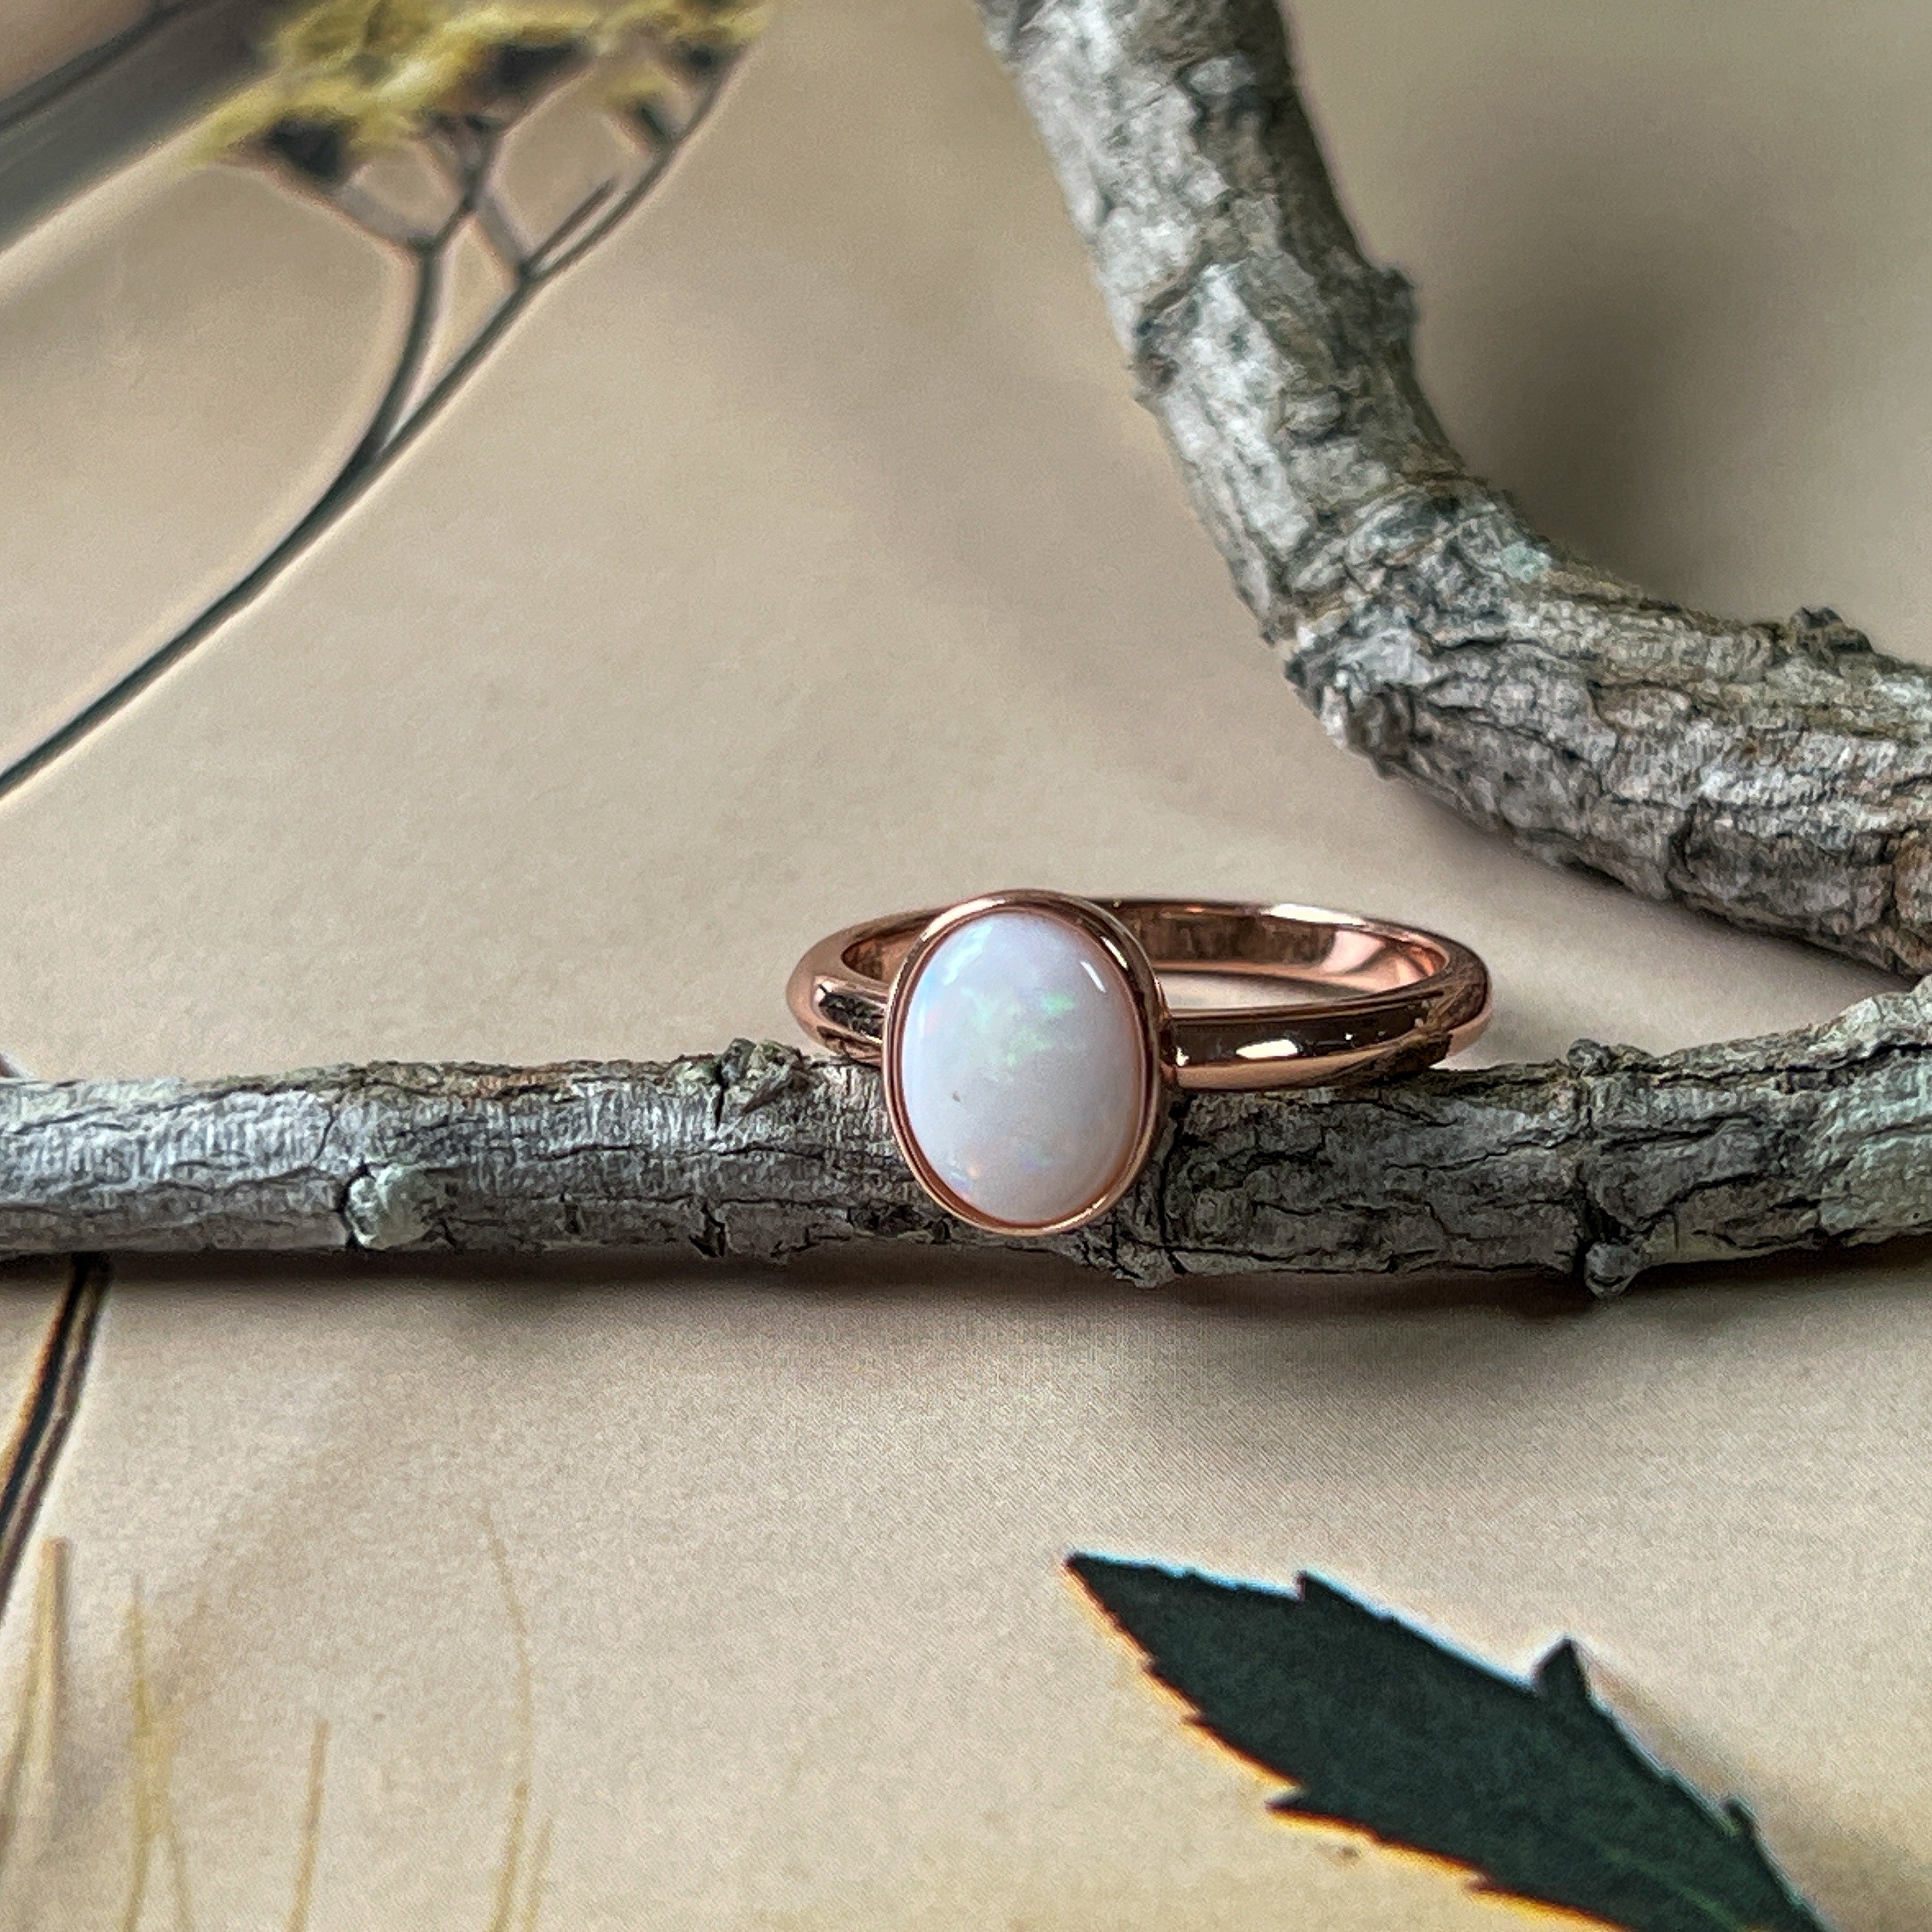 Bezel-Set Solitaire White Opal Ring - 10x8mm, Rose Gold-Plated Sterling Silver, Elegant Minimalist Jewelry, Perfect Gift for Her - Masterpiece Jewellery Opal & Gems Sydney Australia | Online Shop